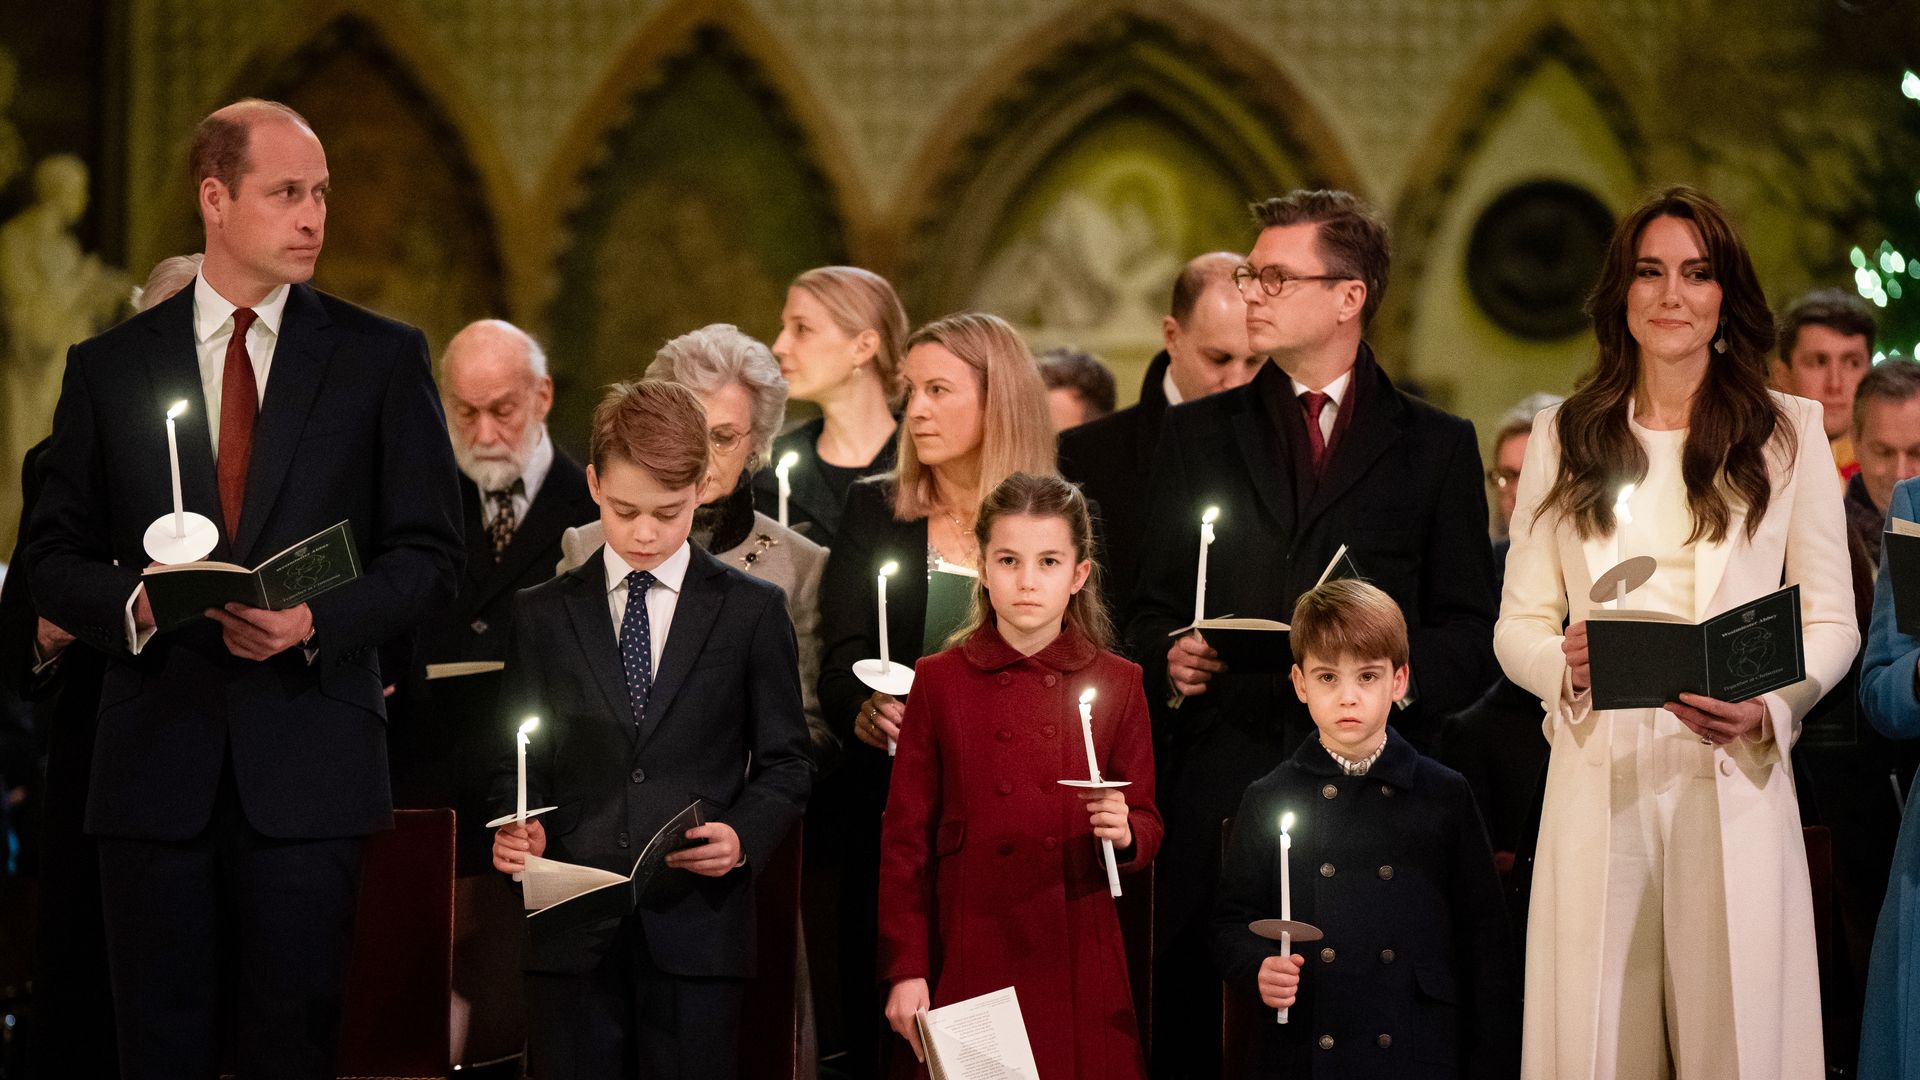 William, George, Charlotte, Louis and Kate holding candles at carol service